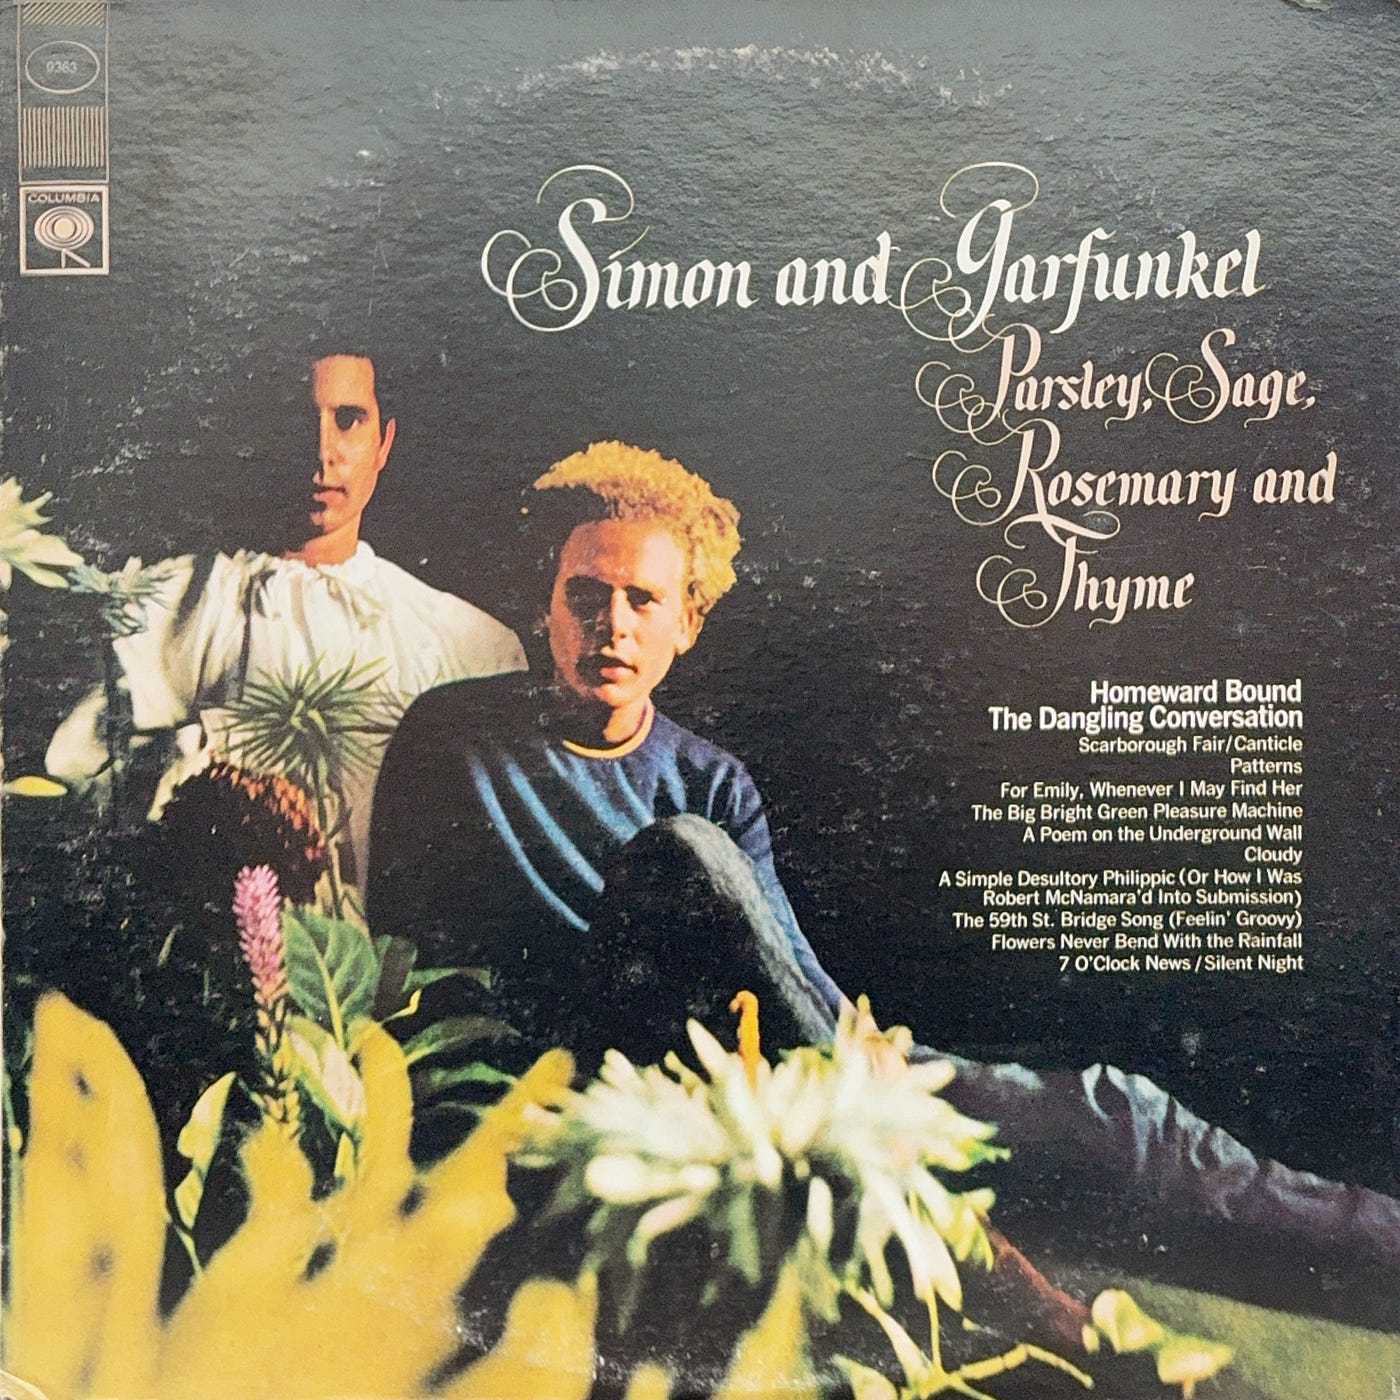 Simon & Garfunkel — Parsley, Sage, Rosemary and Thyme | by A 